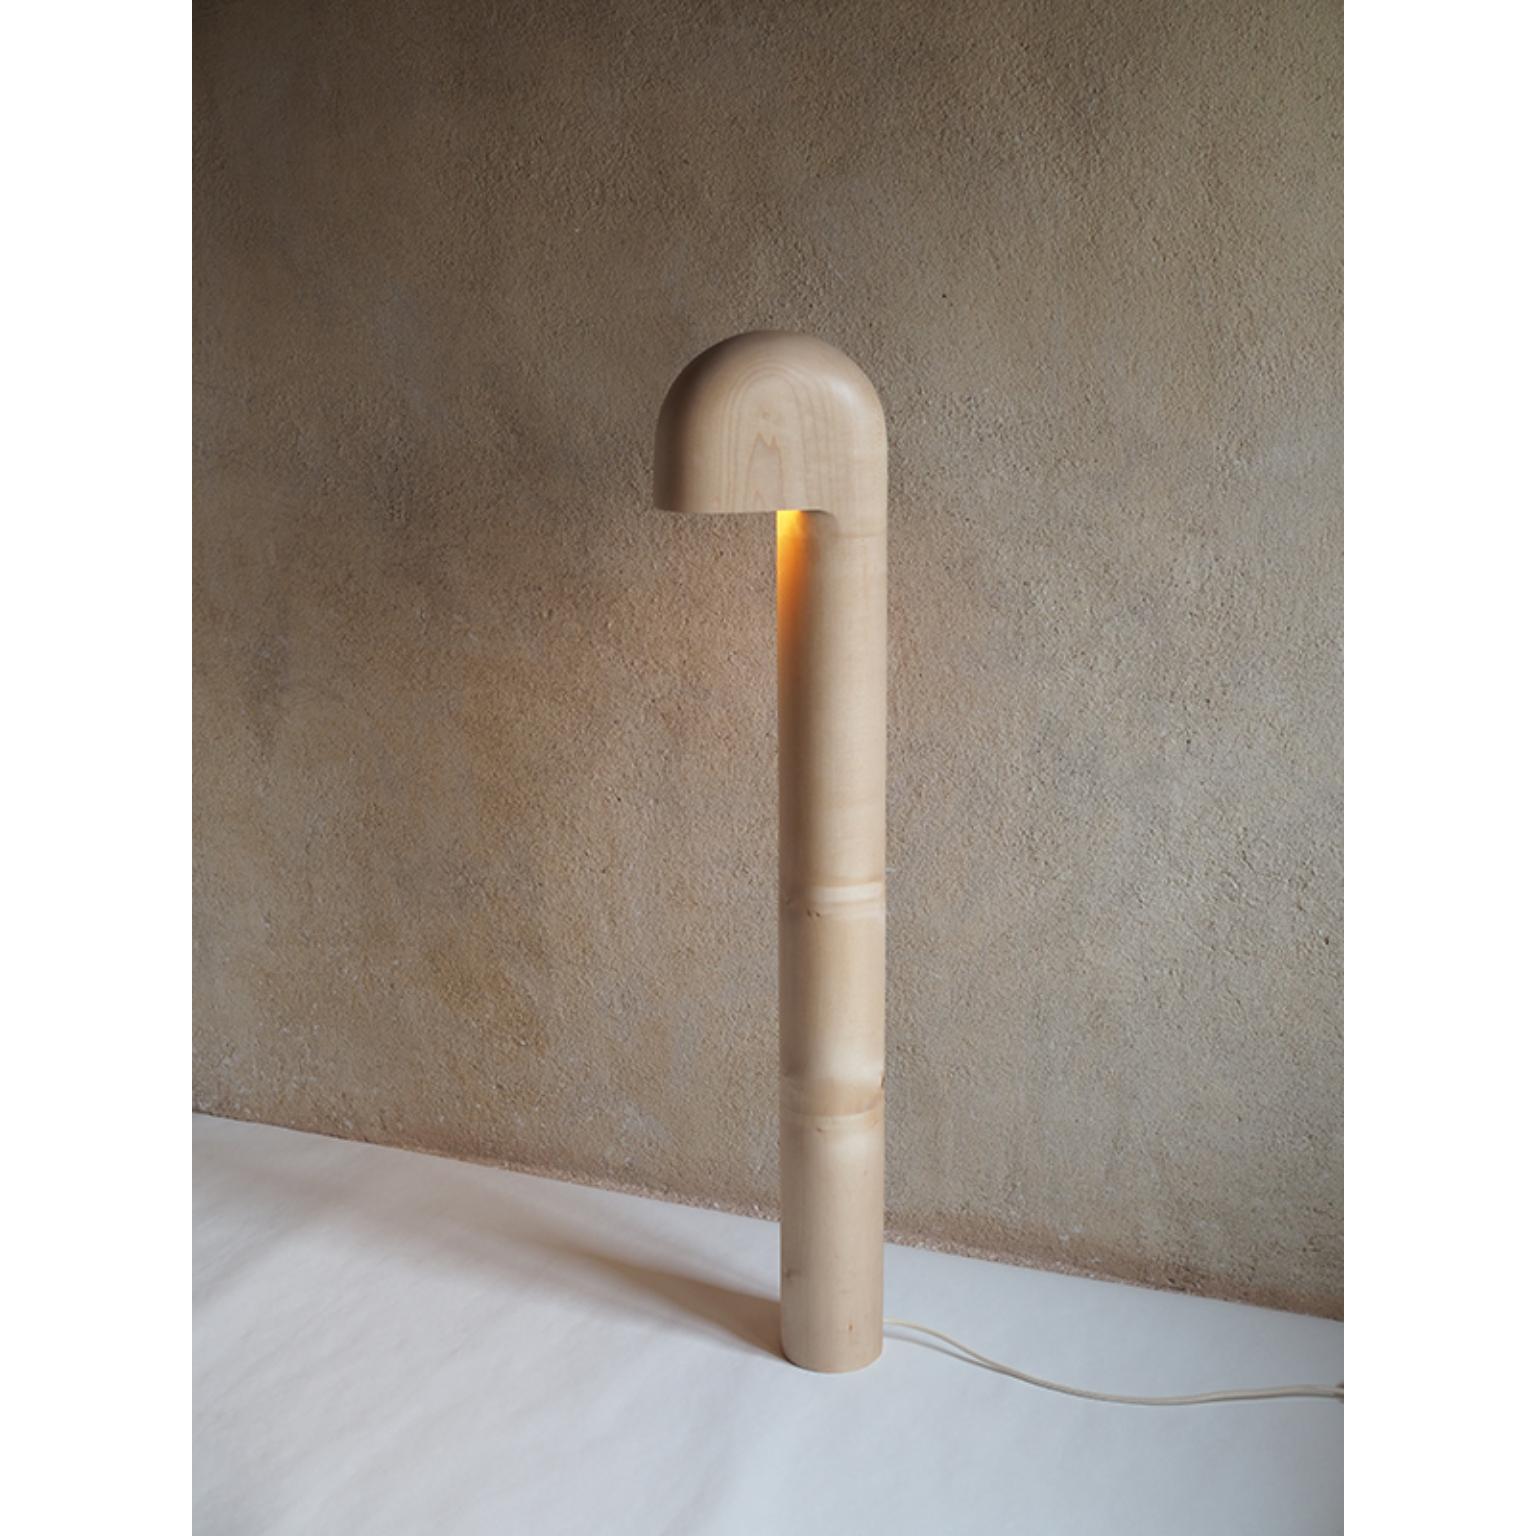 Sycamore Maple Lampadaire Large Floor Lamp by Pauline Pietri
Unique Piece.
Dimensions: Ø 120 x H 280 cm. 
Materials: Sycamore maple and natural oil.

All our lamps can be wired according to each country. If sold to the USA it will be wired for the